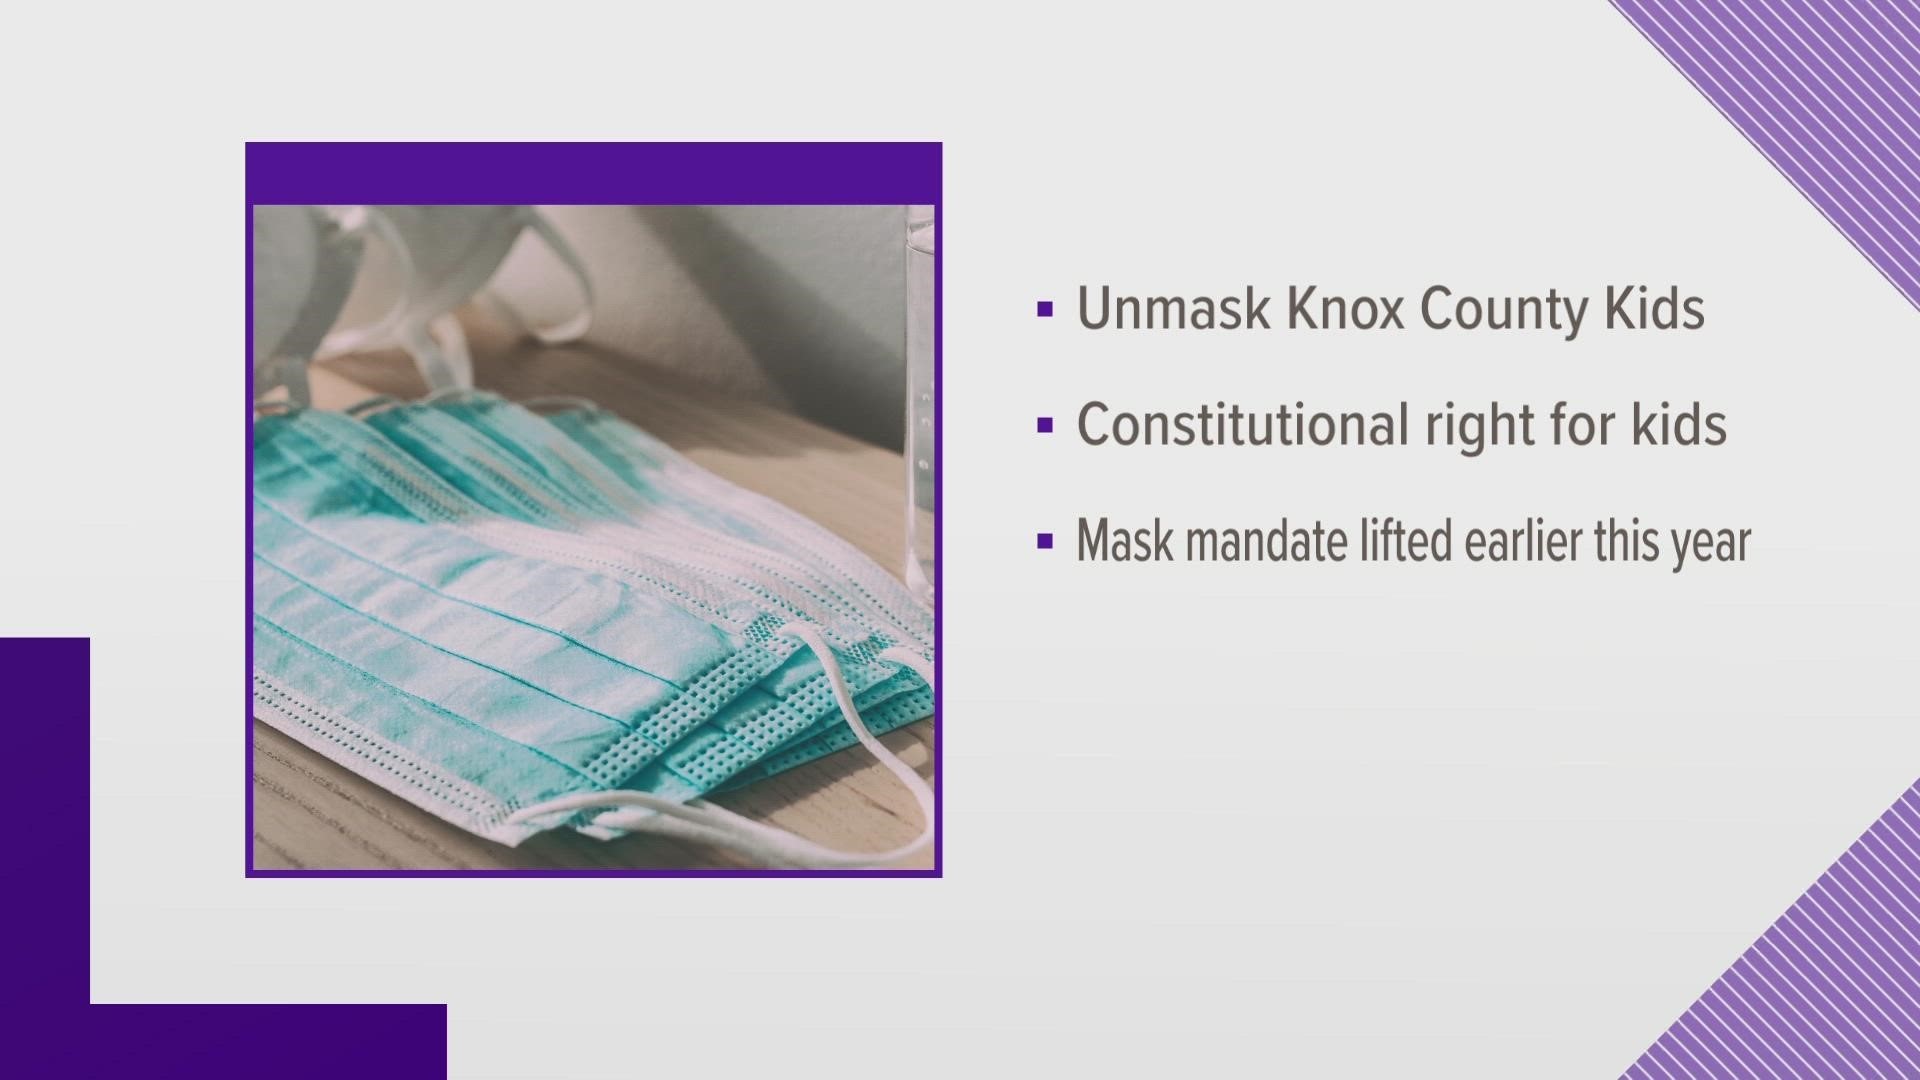 A federal judge has dismissed a lawsuit supported by Knox County Mayor Glenn Jacobs to "unmask Knox County."